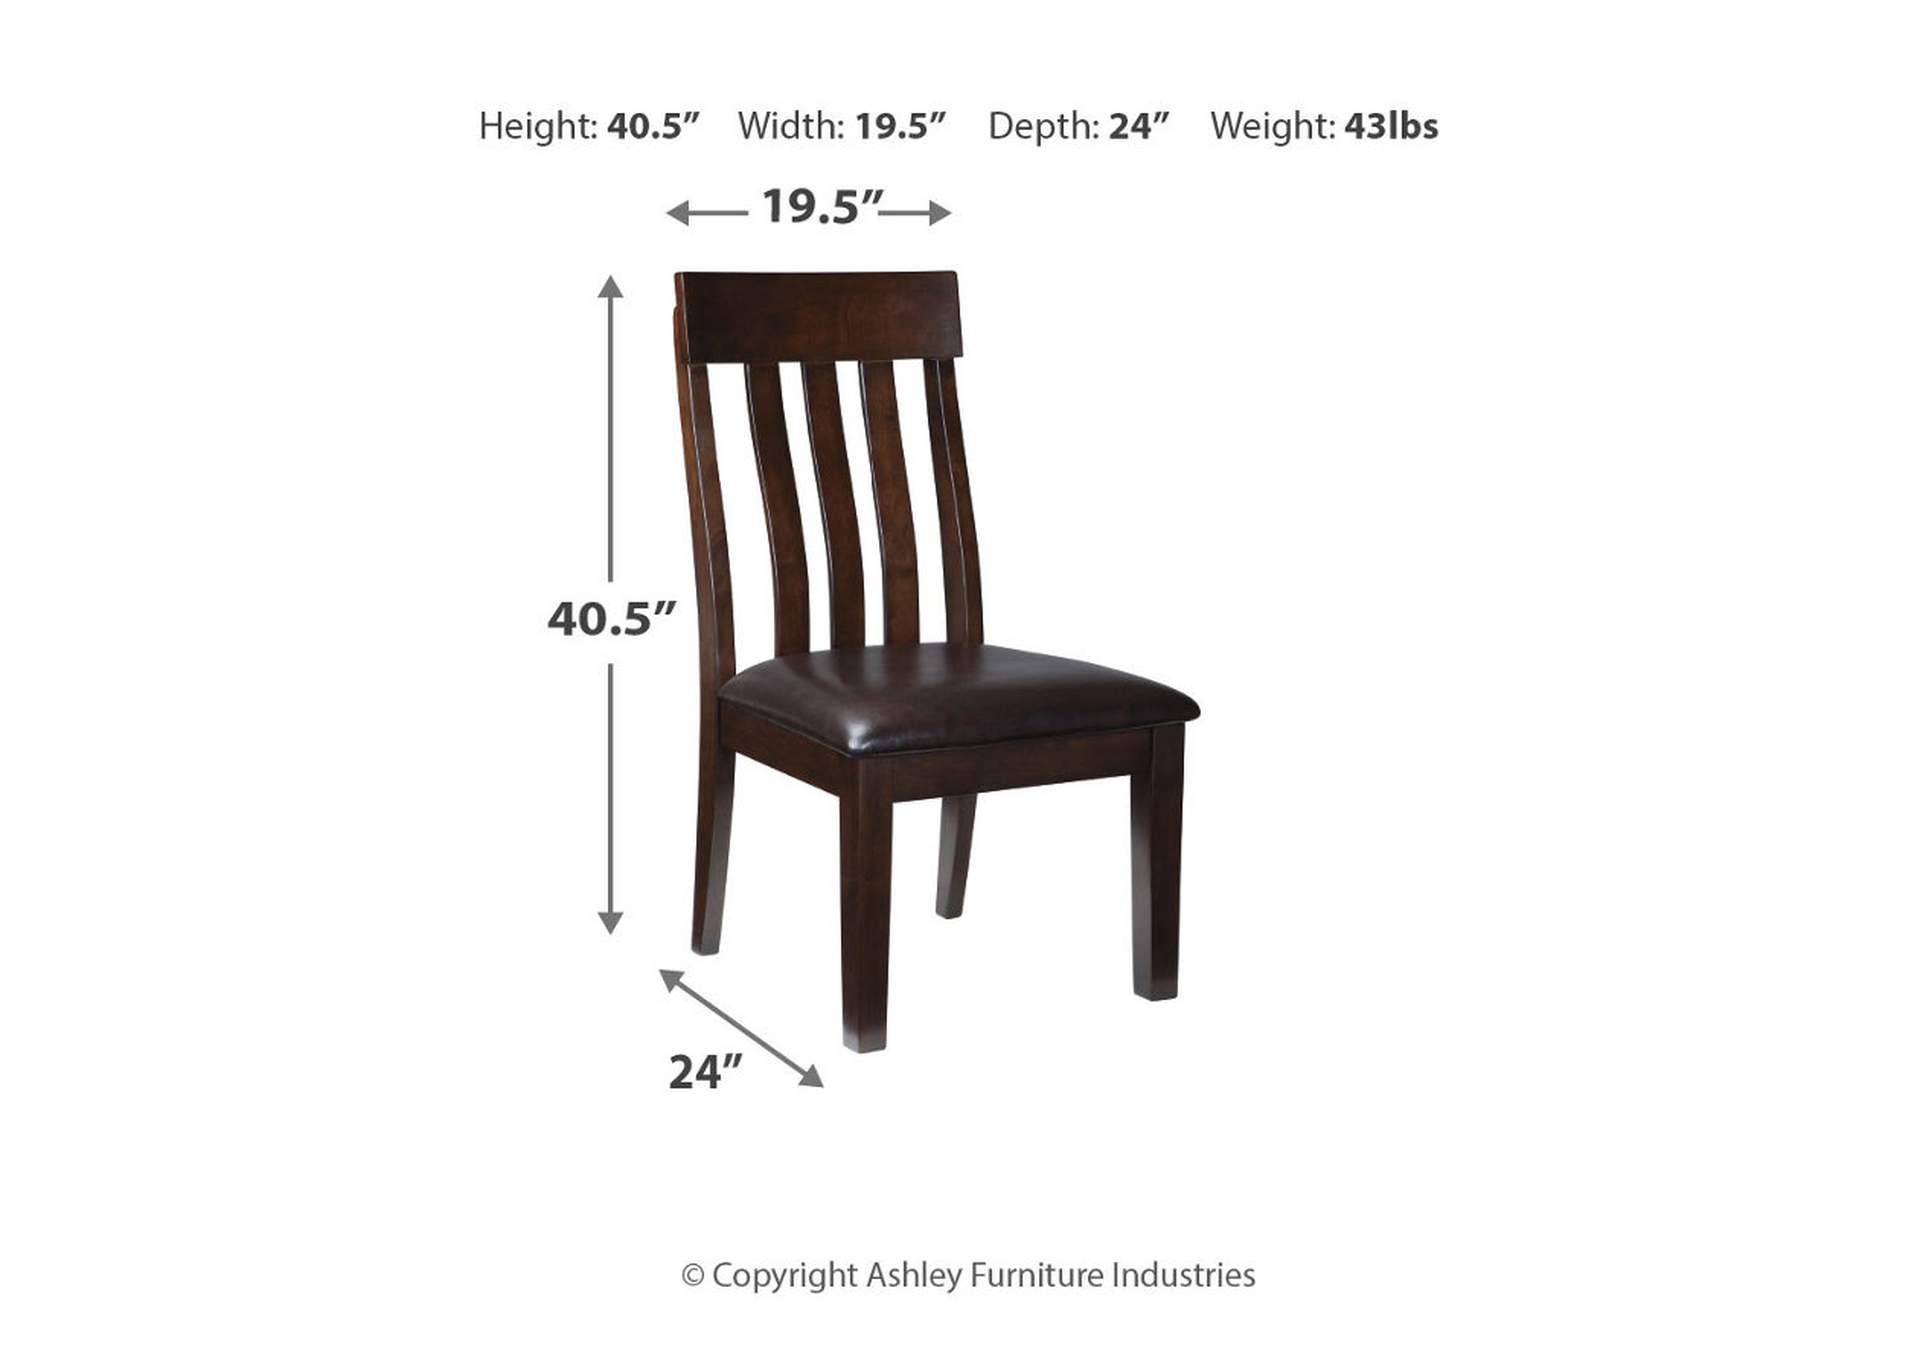 Haddigan Dining Chair (Set of 2),Signature Design By Ashley